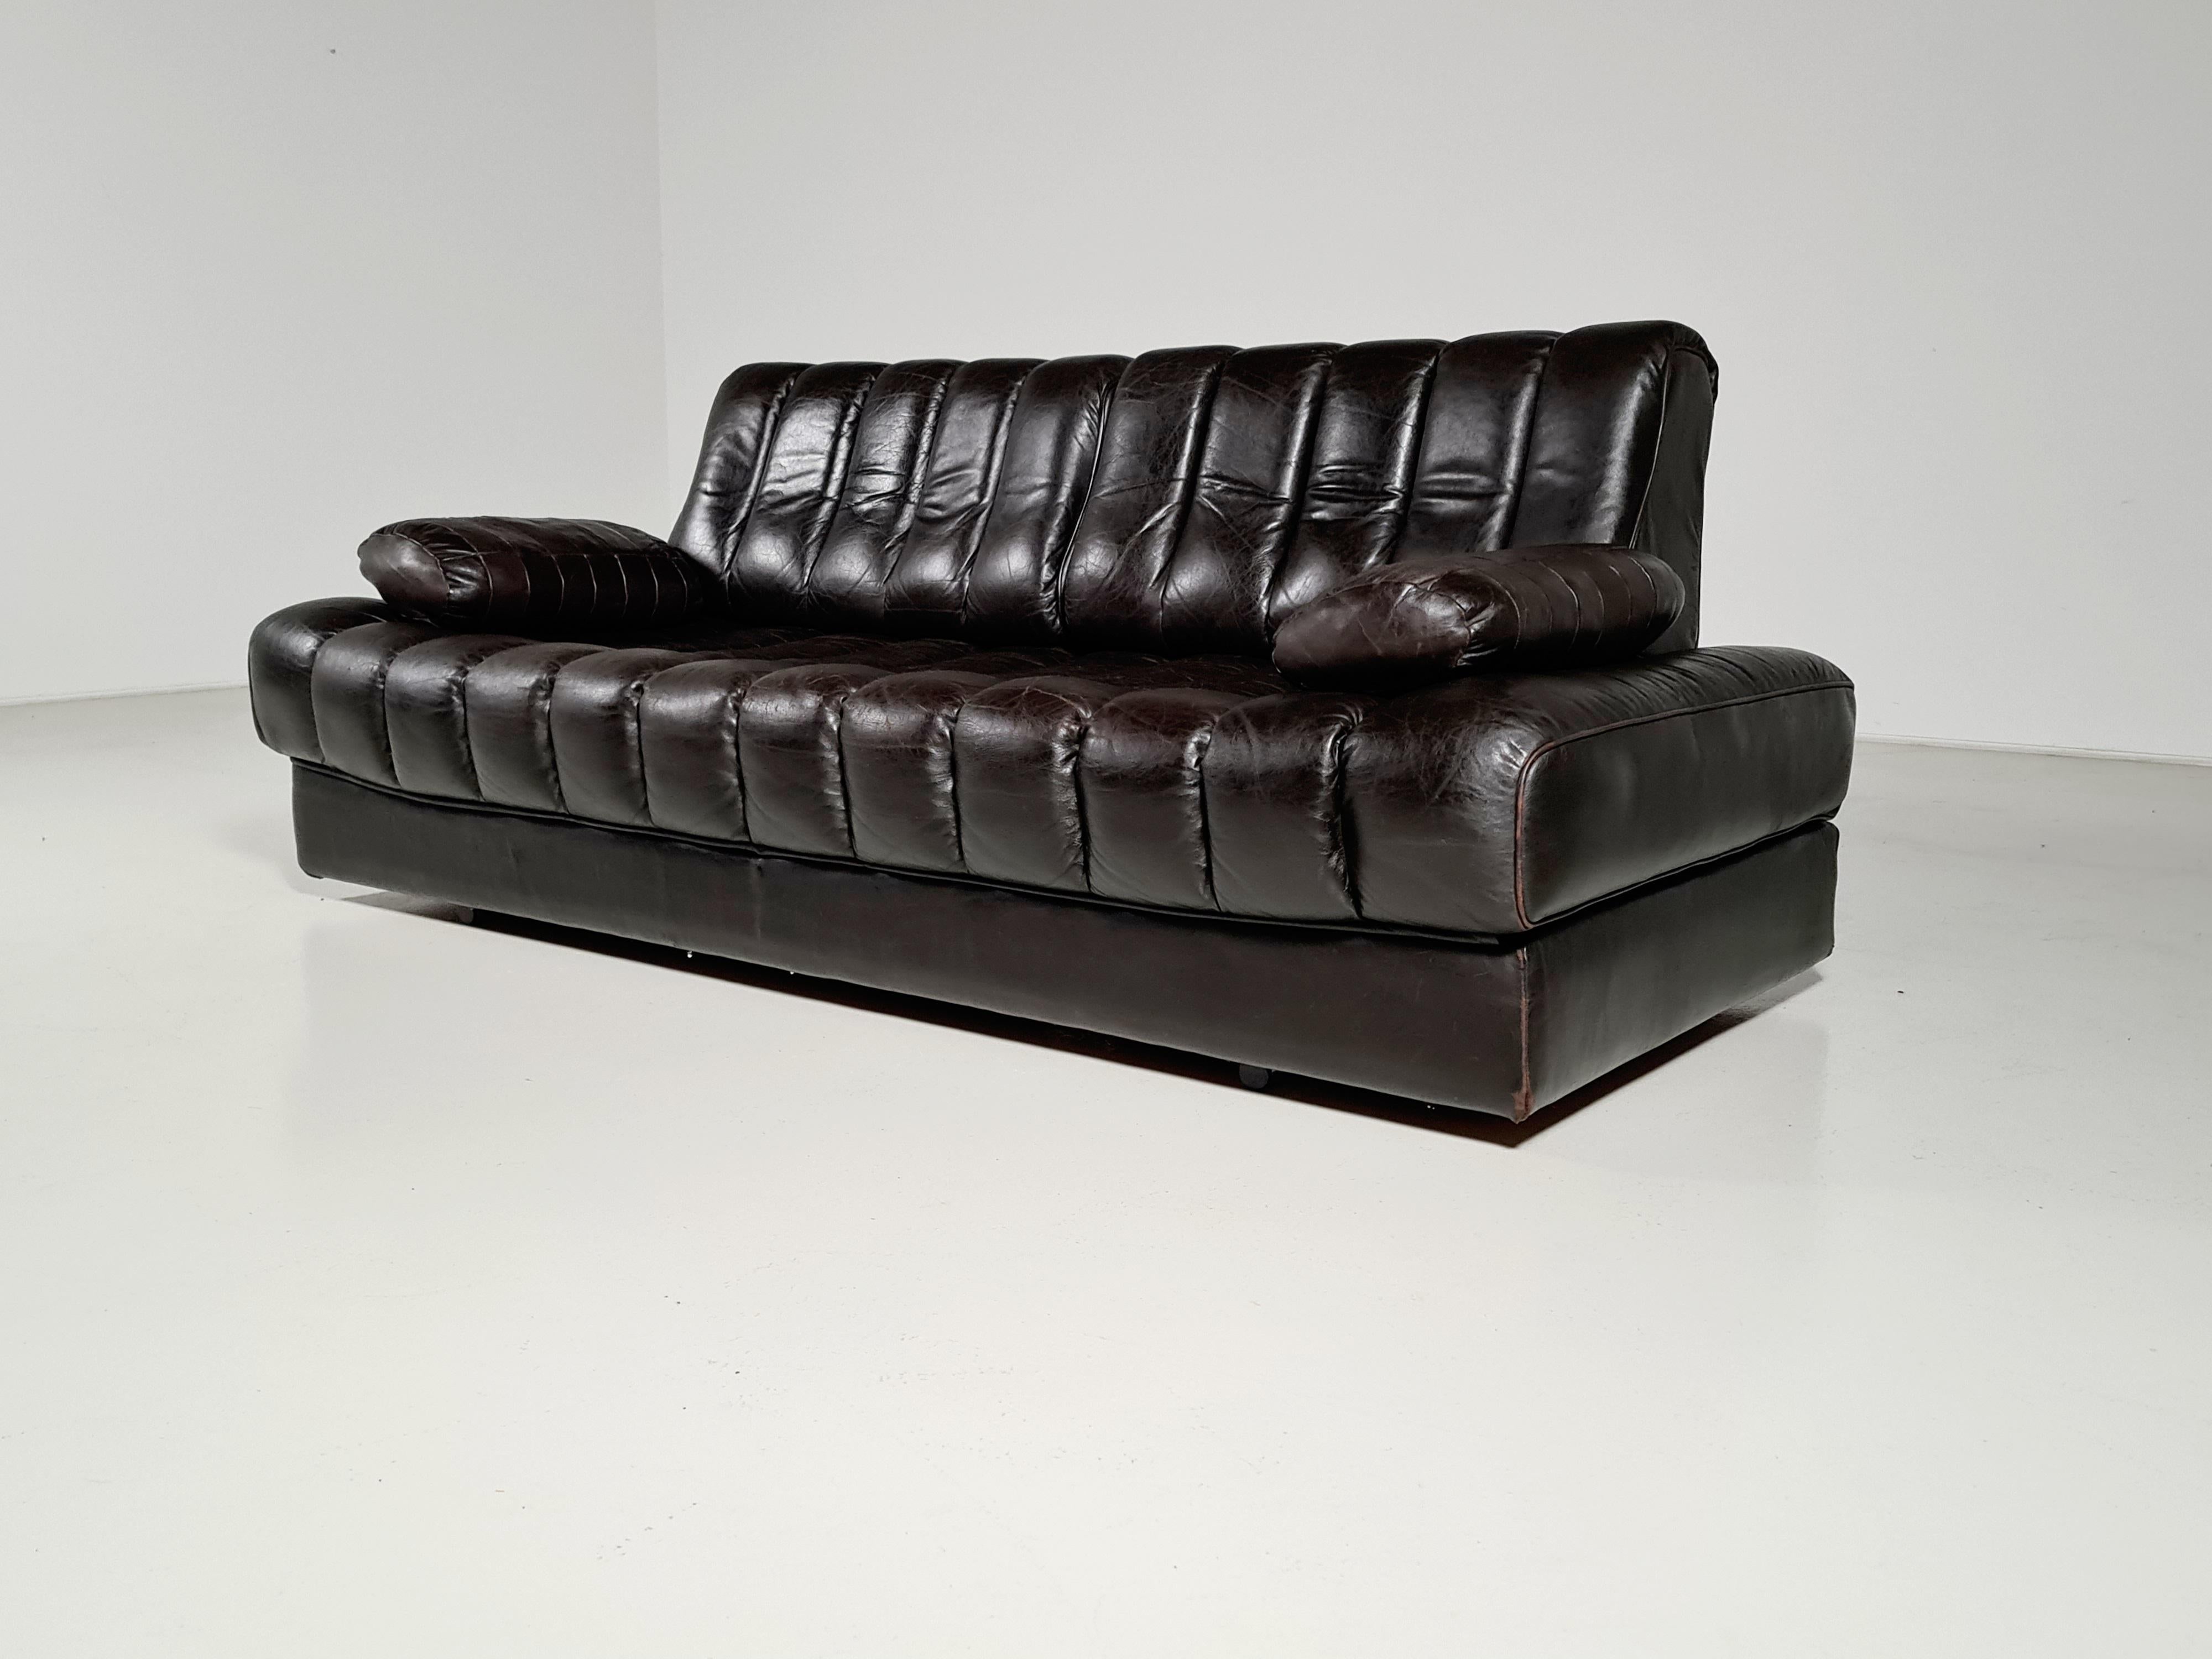 Beautiful vintage leather De Sede DS-85 versatile daybed sofa in a dark brown color with patina. Can be used as a daybed or opens up into a larger double bed. This unique vintage De Sede sofa daybed made in Switzerland, circa 1970s is in good